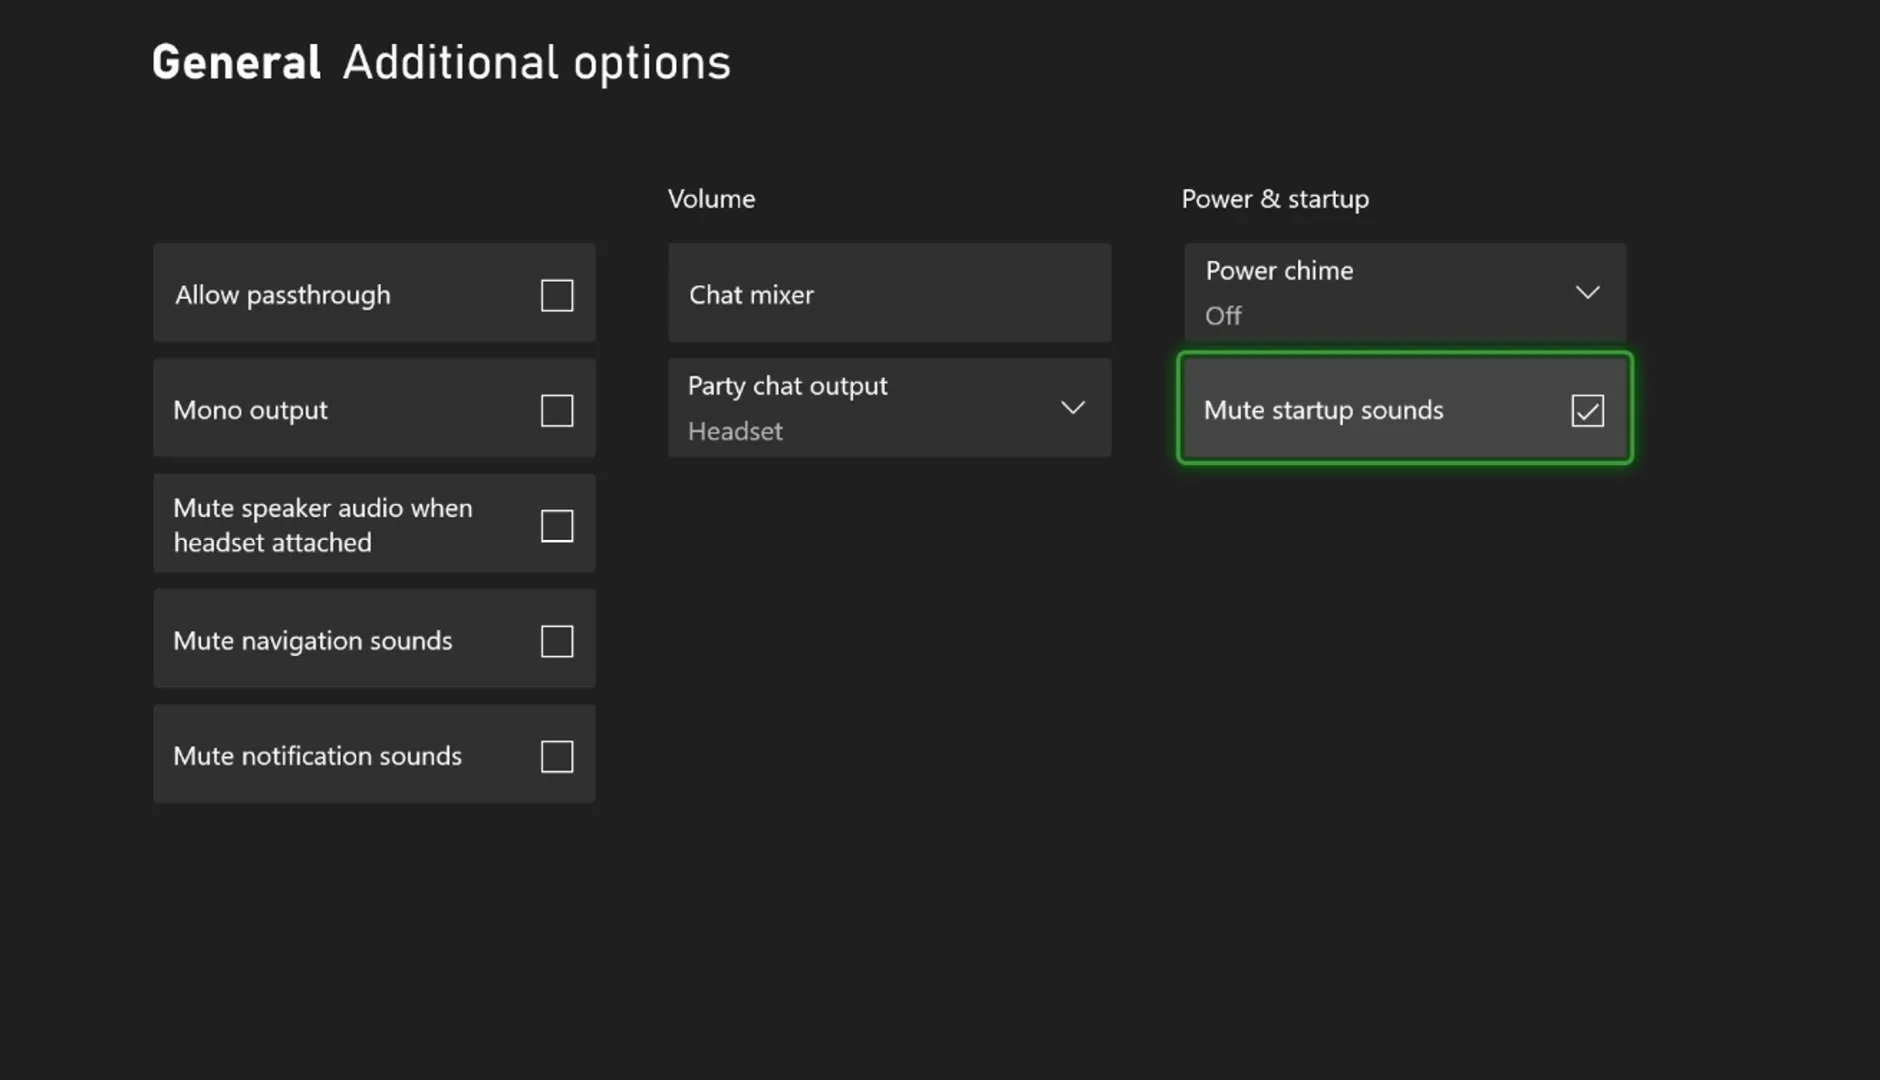 Xbox October Update: New "Mute startup sounds" option on Xbox